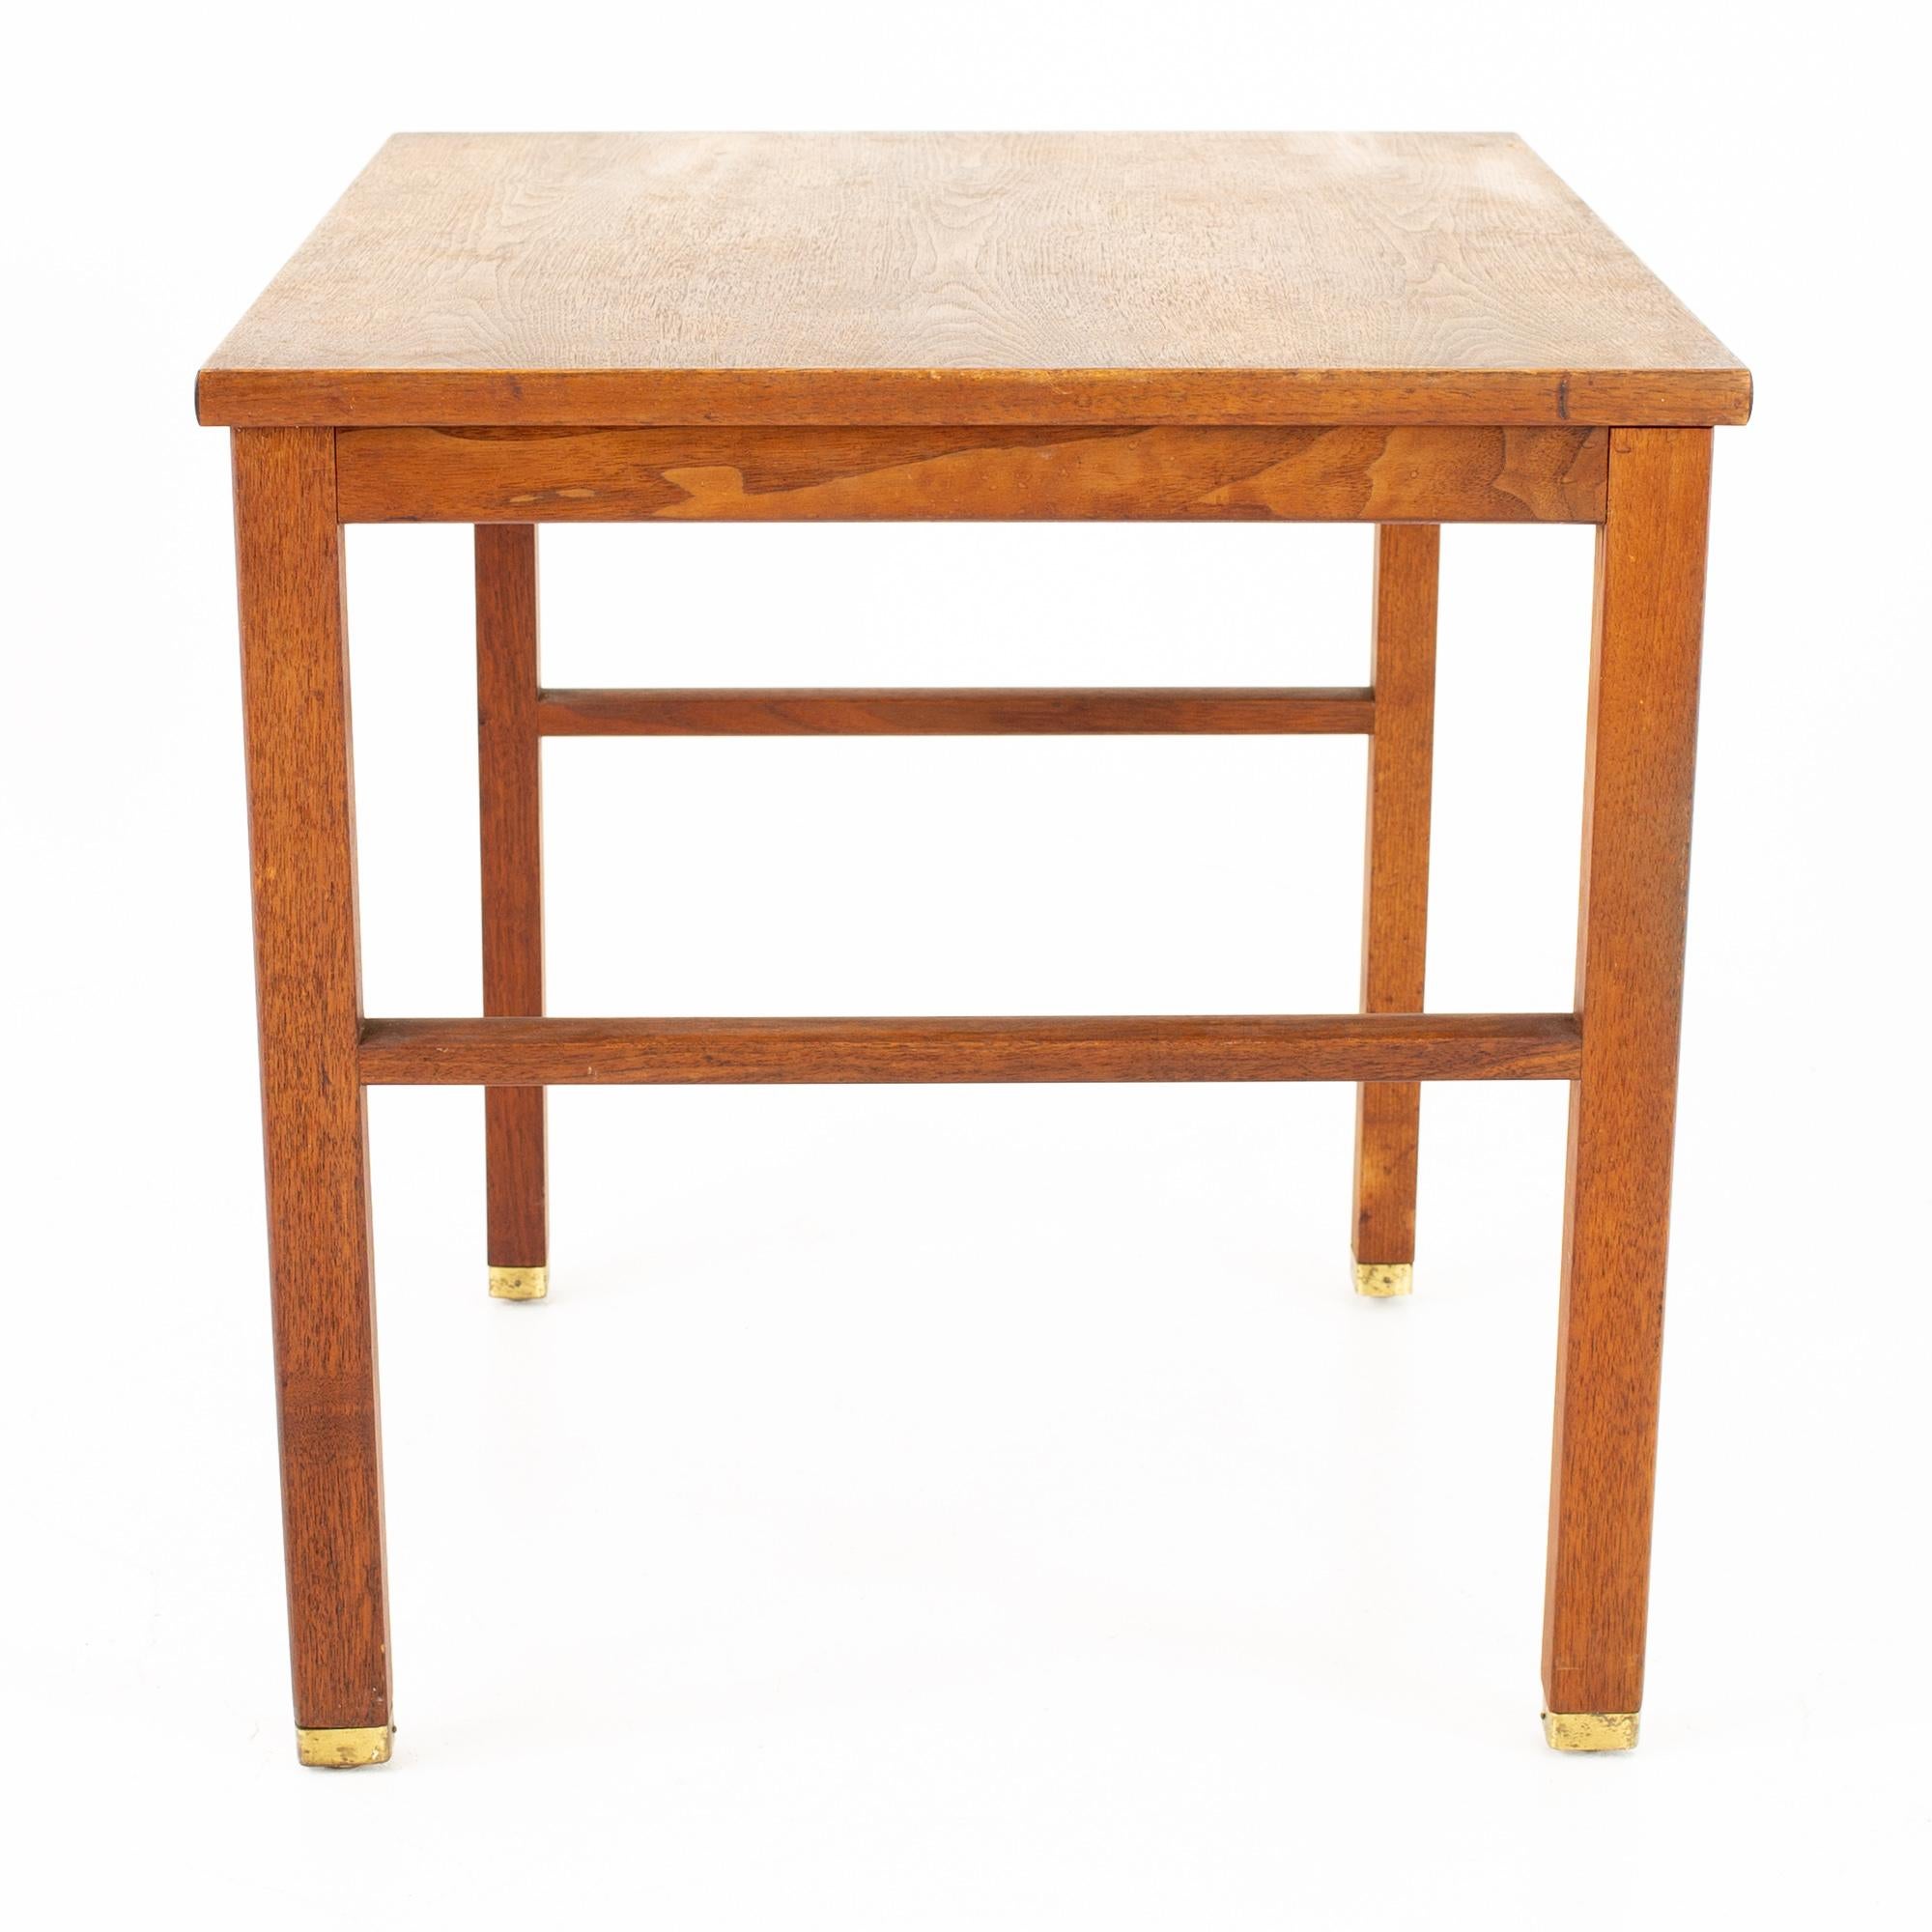 Edward Wormley for Dunbar Mid Century Mahogany and Brass Side End Table 
22 wide x 28 deep x 22.25 high 
See below for 5 ways to save!
FREE RESTORATION: When you purchase a piece we carefully clean and prepare it for shipping. If during